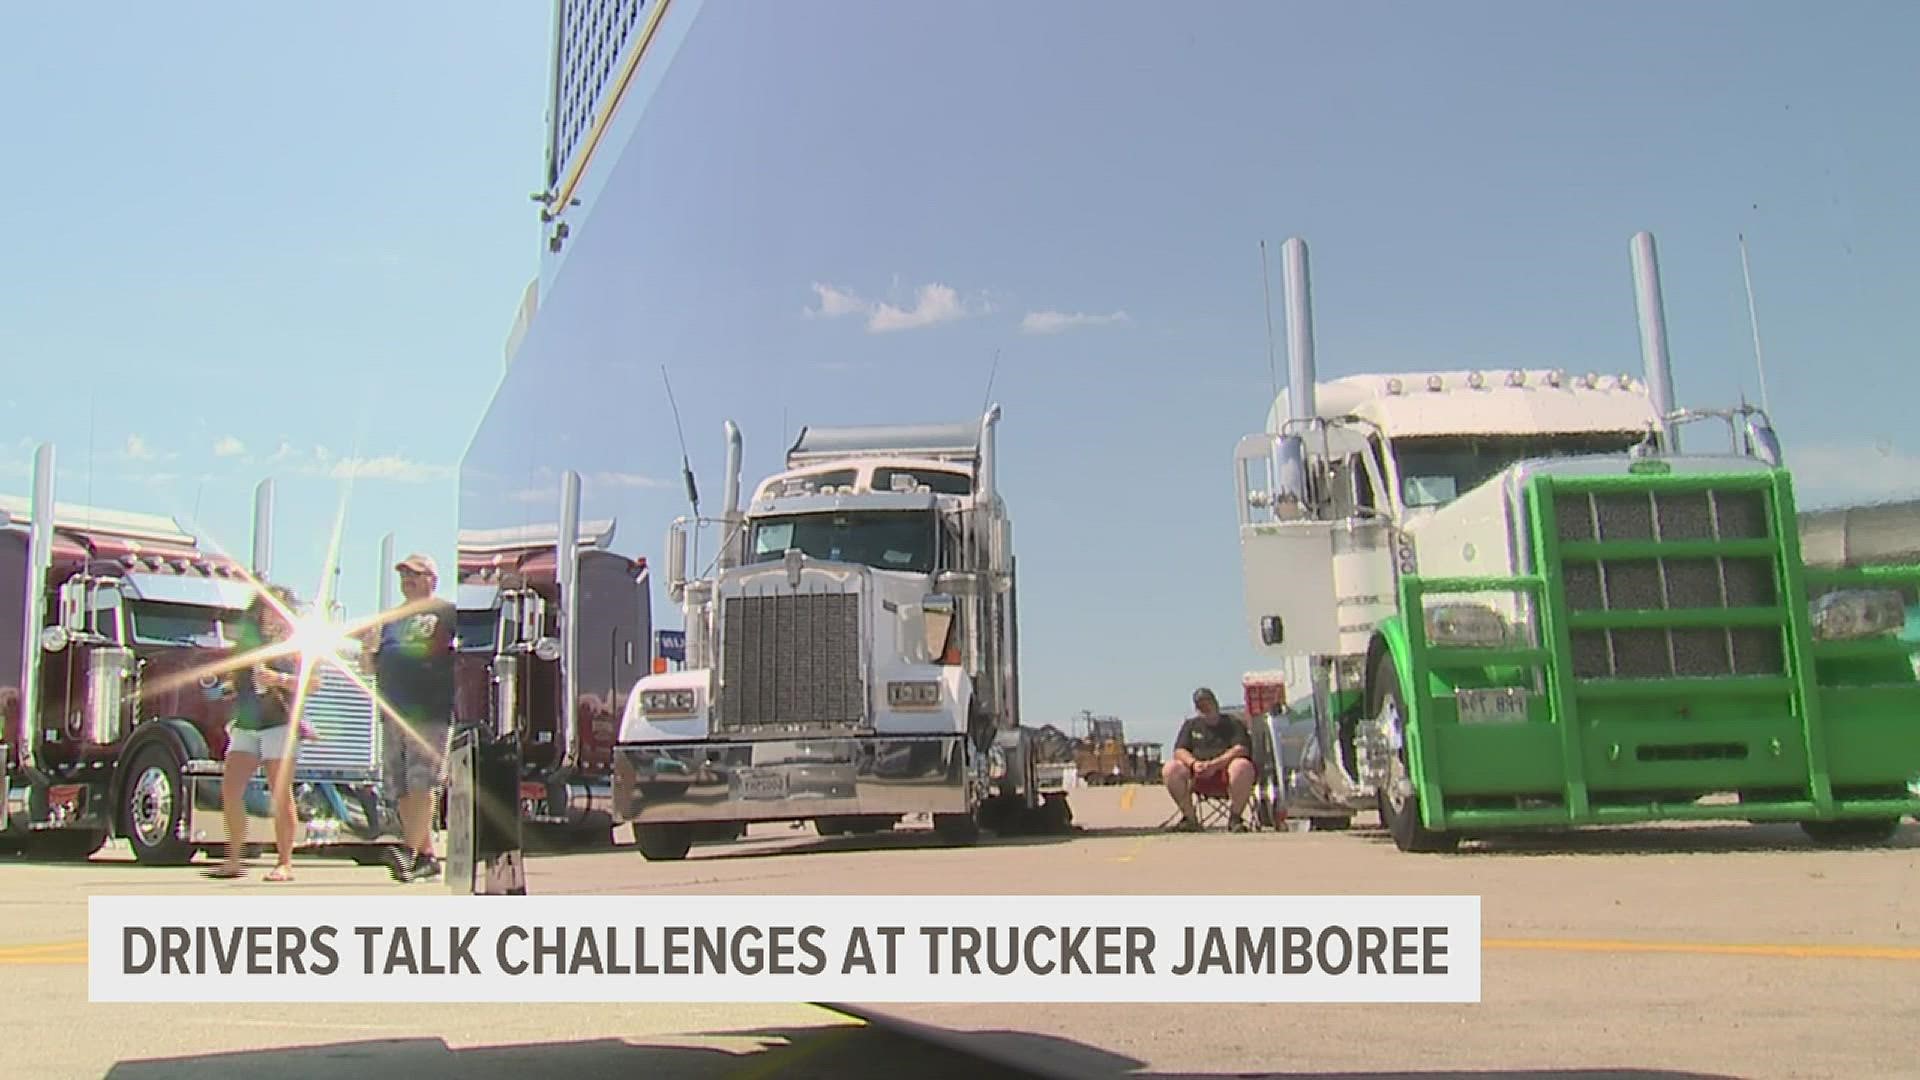 Truckers are rolling into Walcott for the 43rd Trucker Jamboree this weekend. It is an annual gathering for truckers from across North America.